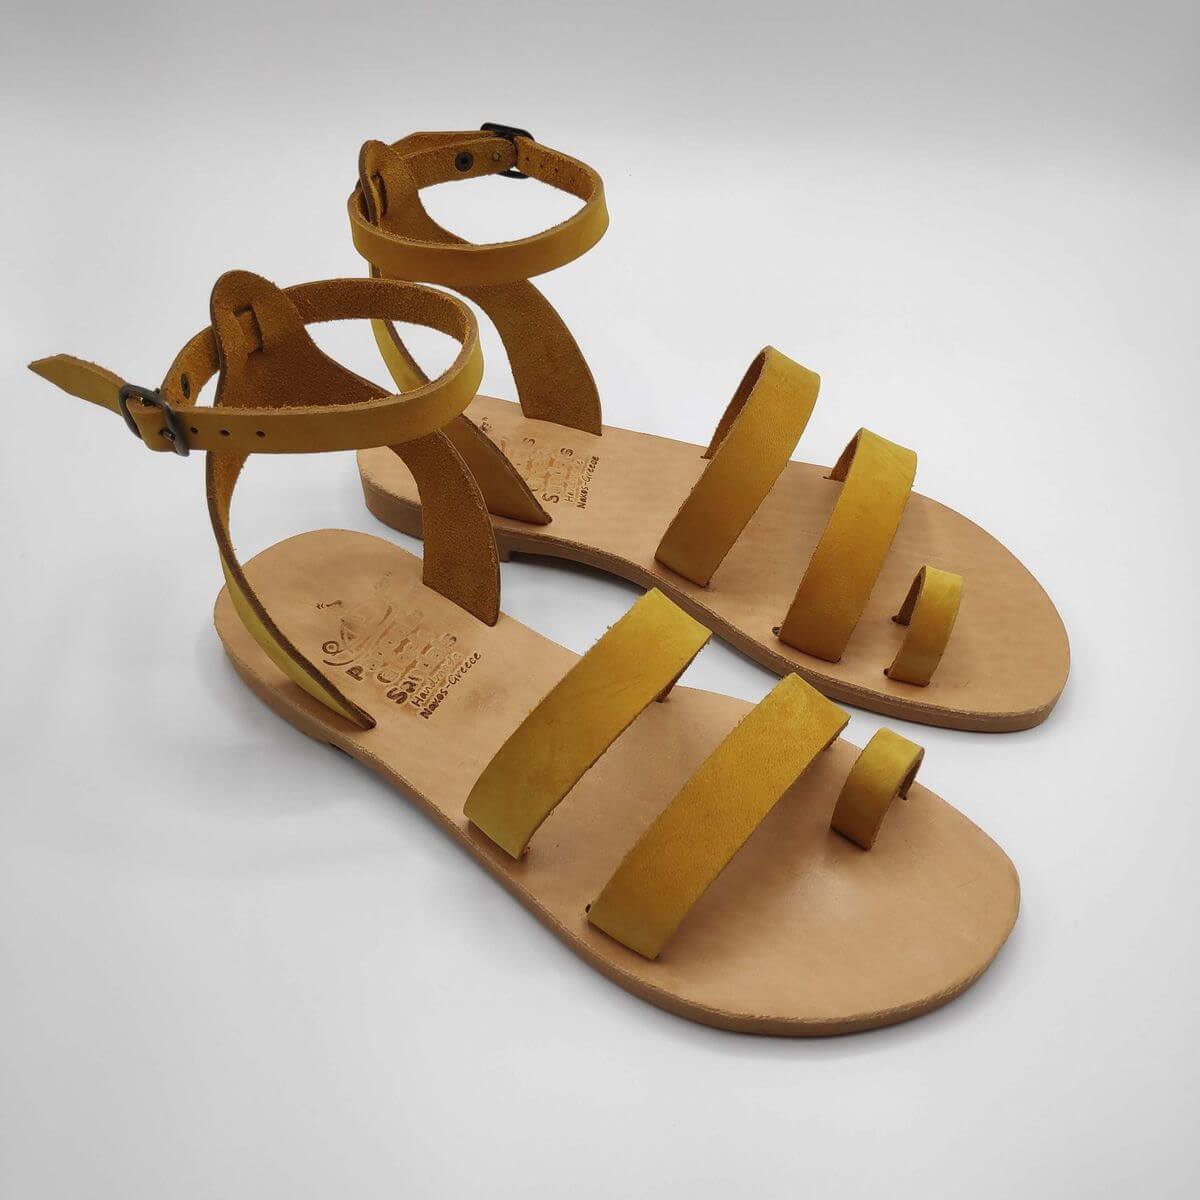 Yellow nubuck leather dressy sandals with two straps, toe ring and high ankle strap, back view